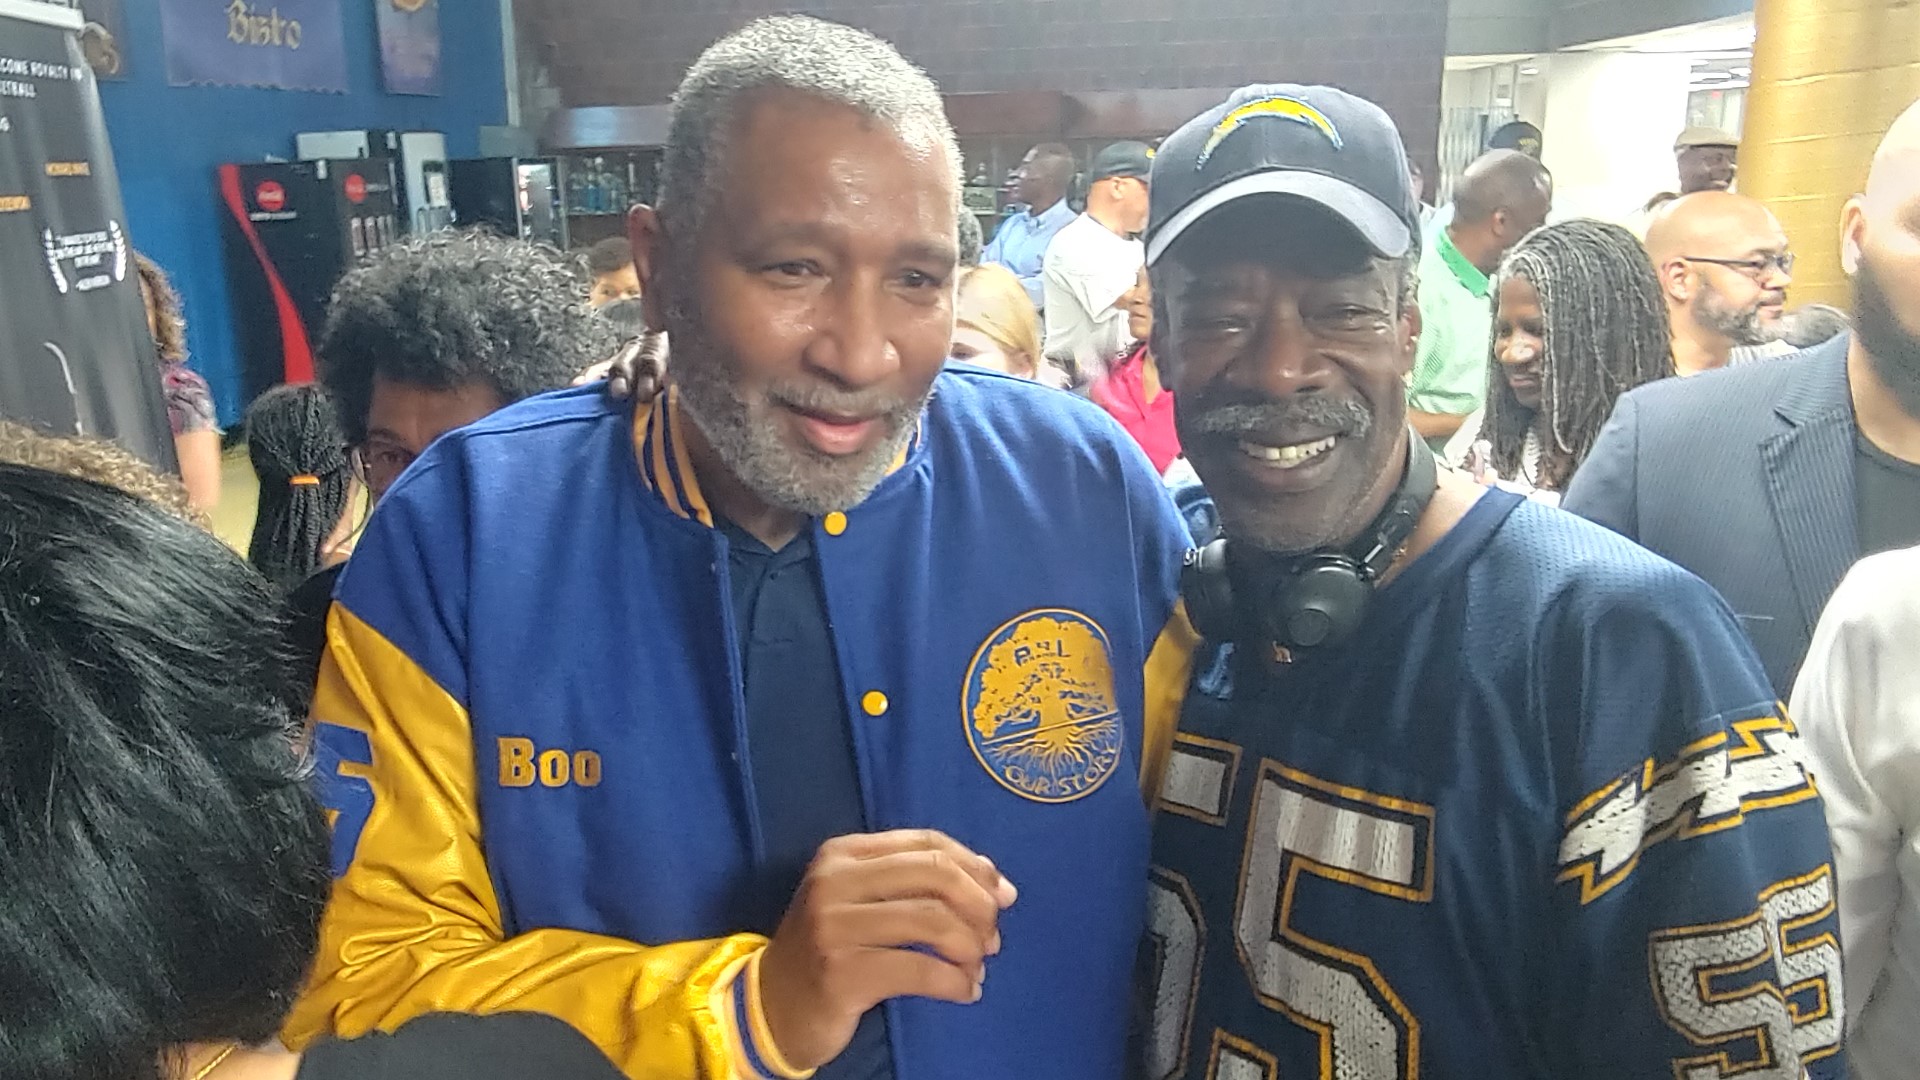 Marcellus Spencer Williams, who everyone around the 757 calls "Boo", was celebrated by his alma mater Phoebus High School where it all started.